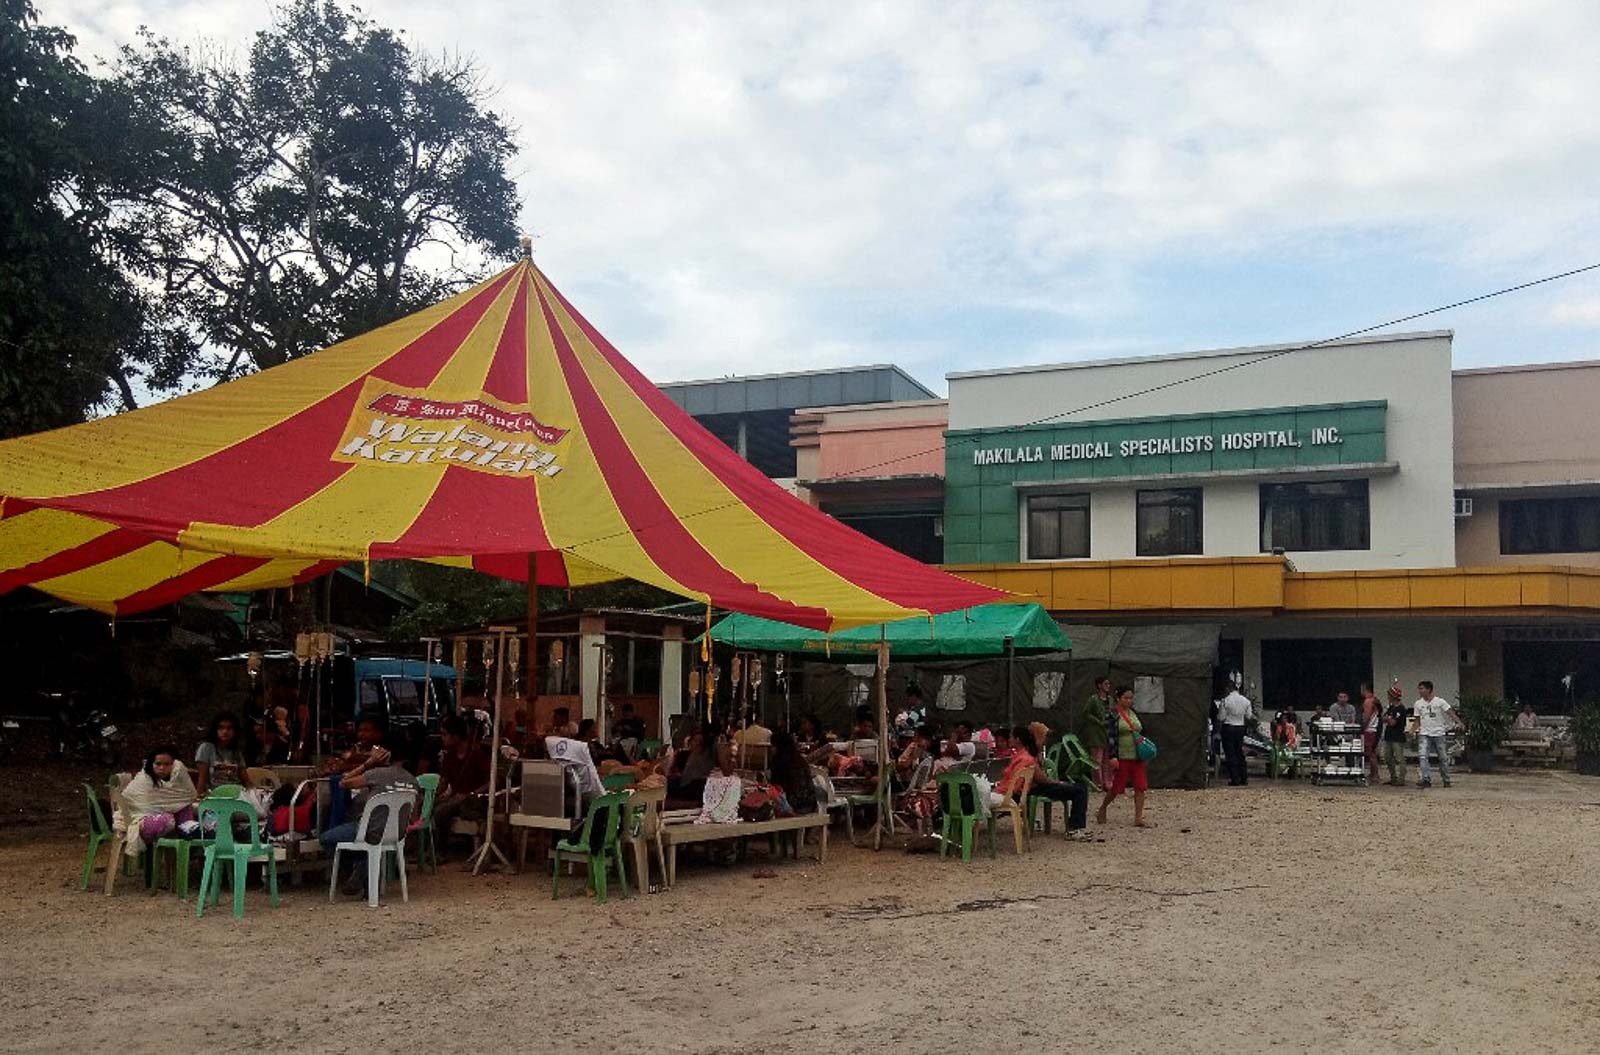 TEMPORARY SHELTER. A tent is pitched as temporary shelter for patients outside a hospital in Makilala, North Cotabato on October 17, 2019. Photo by Geonarri Solmenaro/AFP  